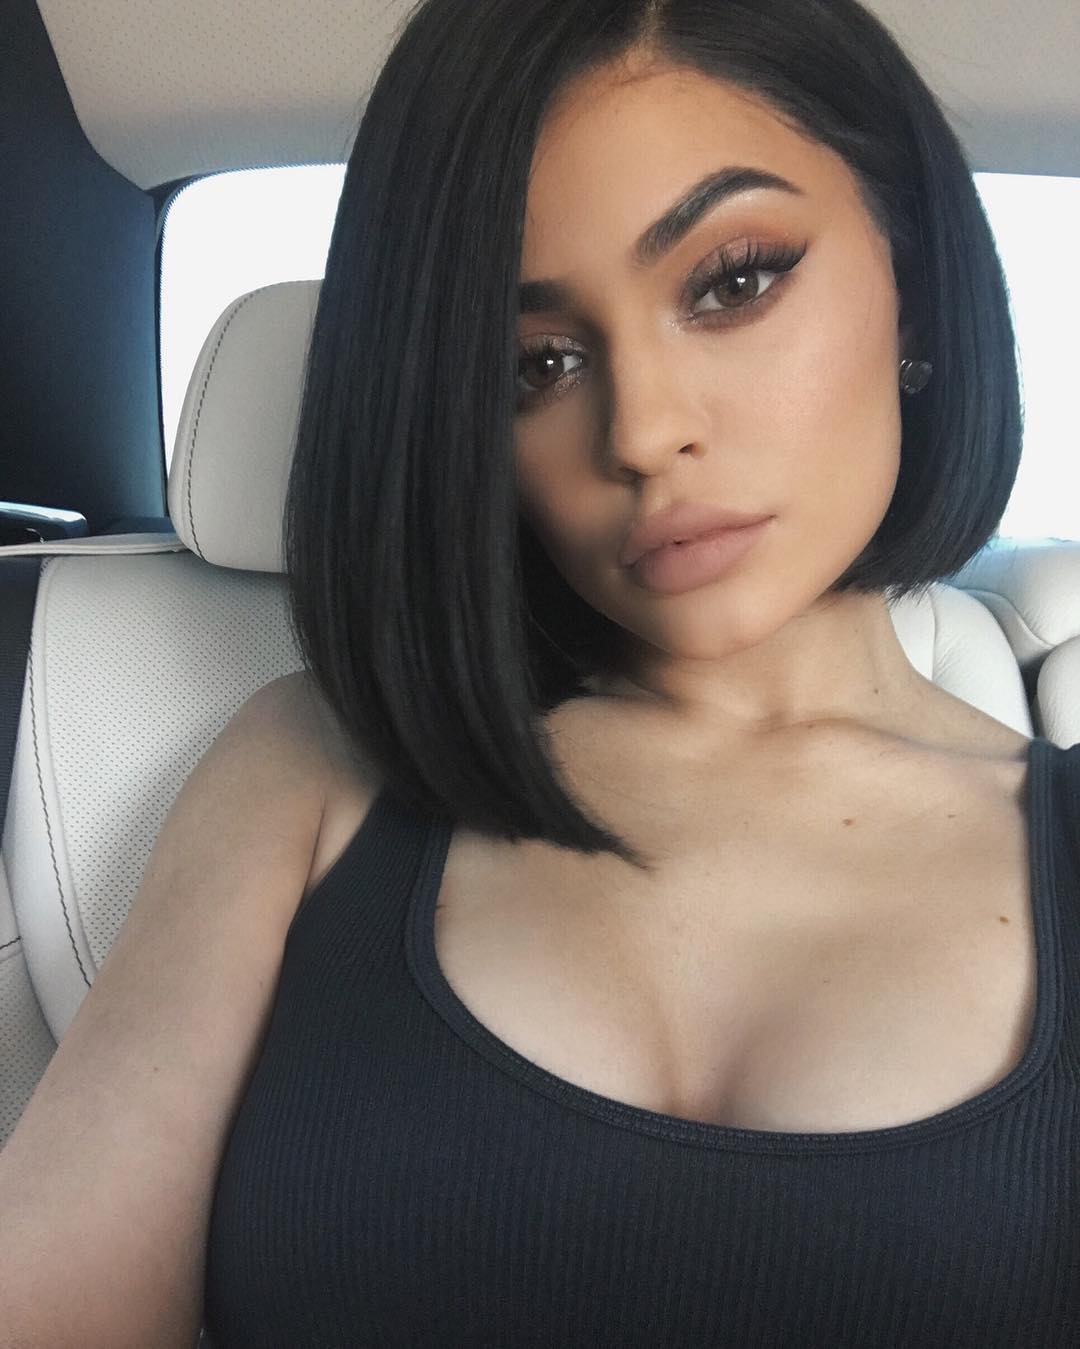 Hot Photos Of Kylie Jenner Thefappening 